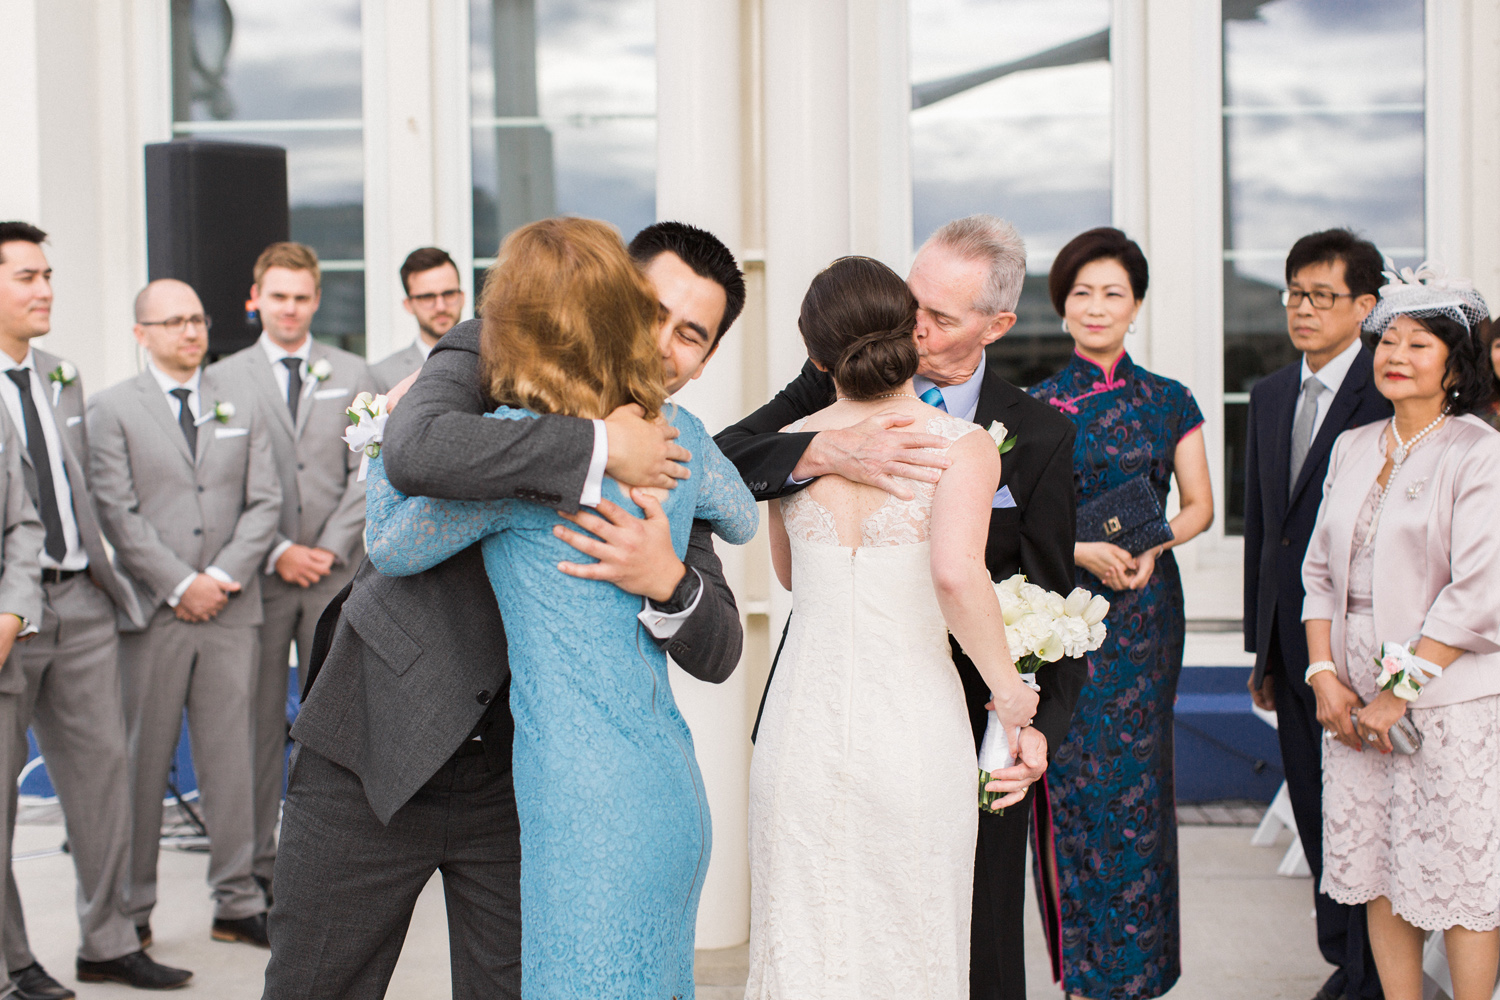 seattle mohai wedding photography museum of history and industry wedding.jpg